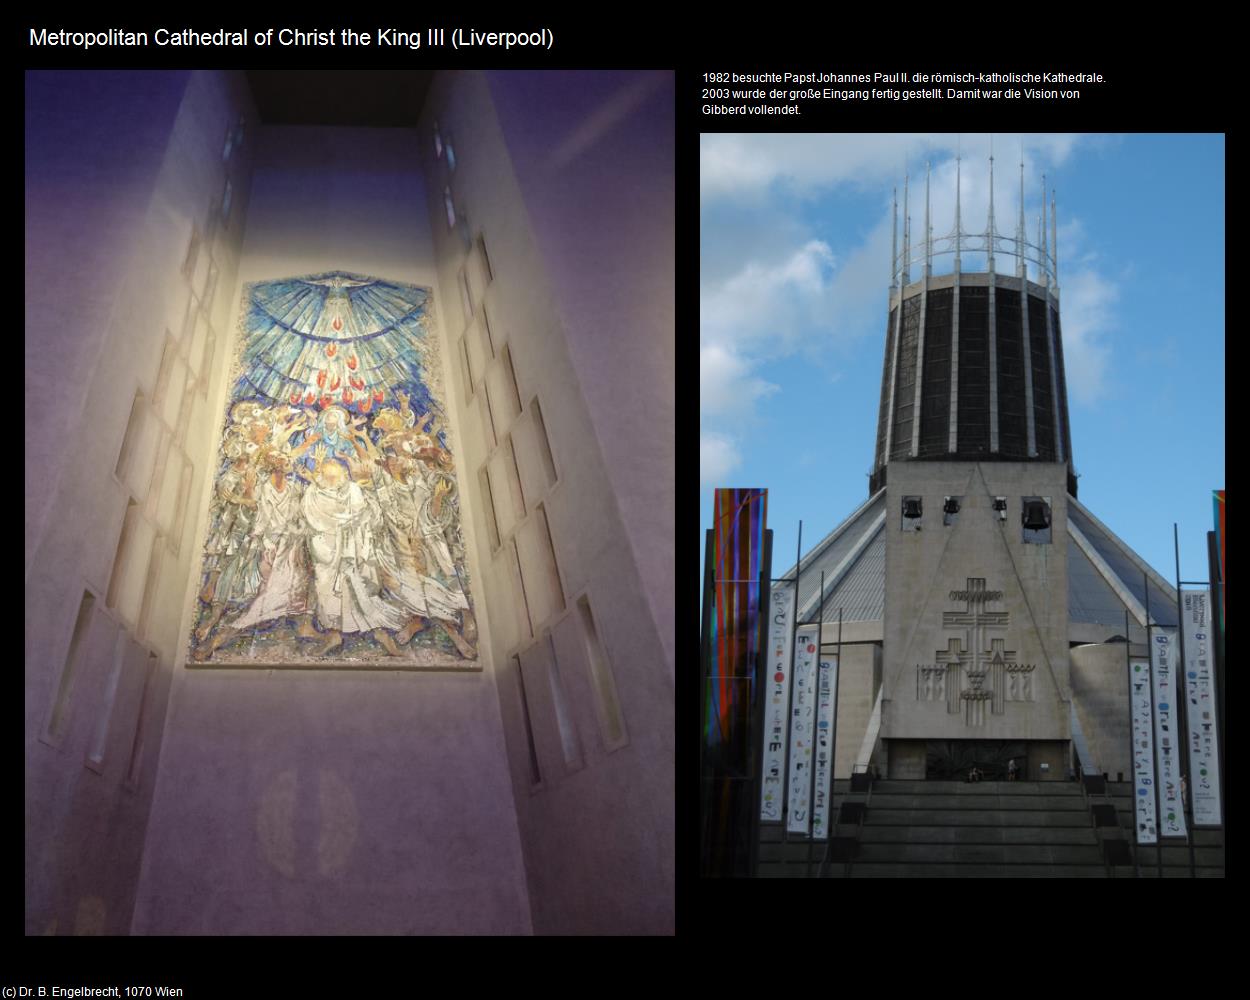 Metropolitan Cathedral of Christ the King III   (Liverpool, England) in Kulturatlas-ENGLAND und WALES